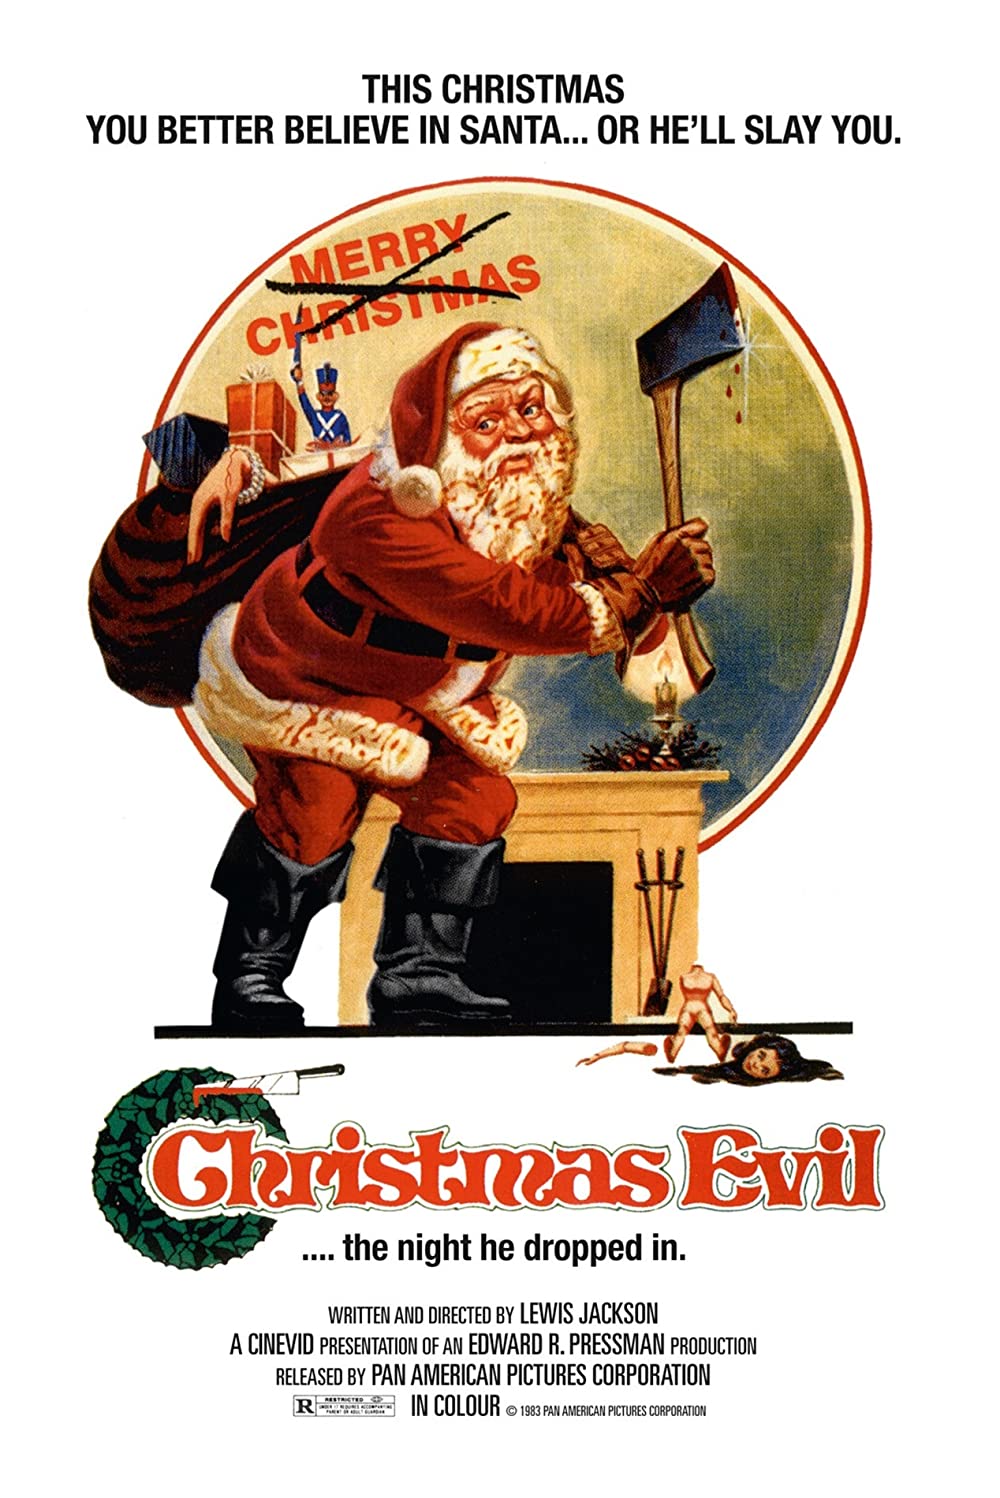 DVD cover of the Christmas Evil, featuring Santa Claus with a bloody axe and "Merry Christmas" crossed out